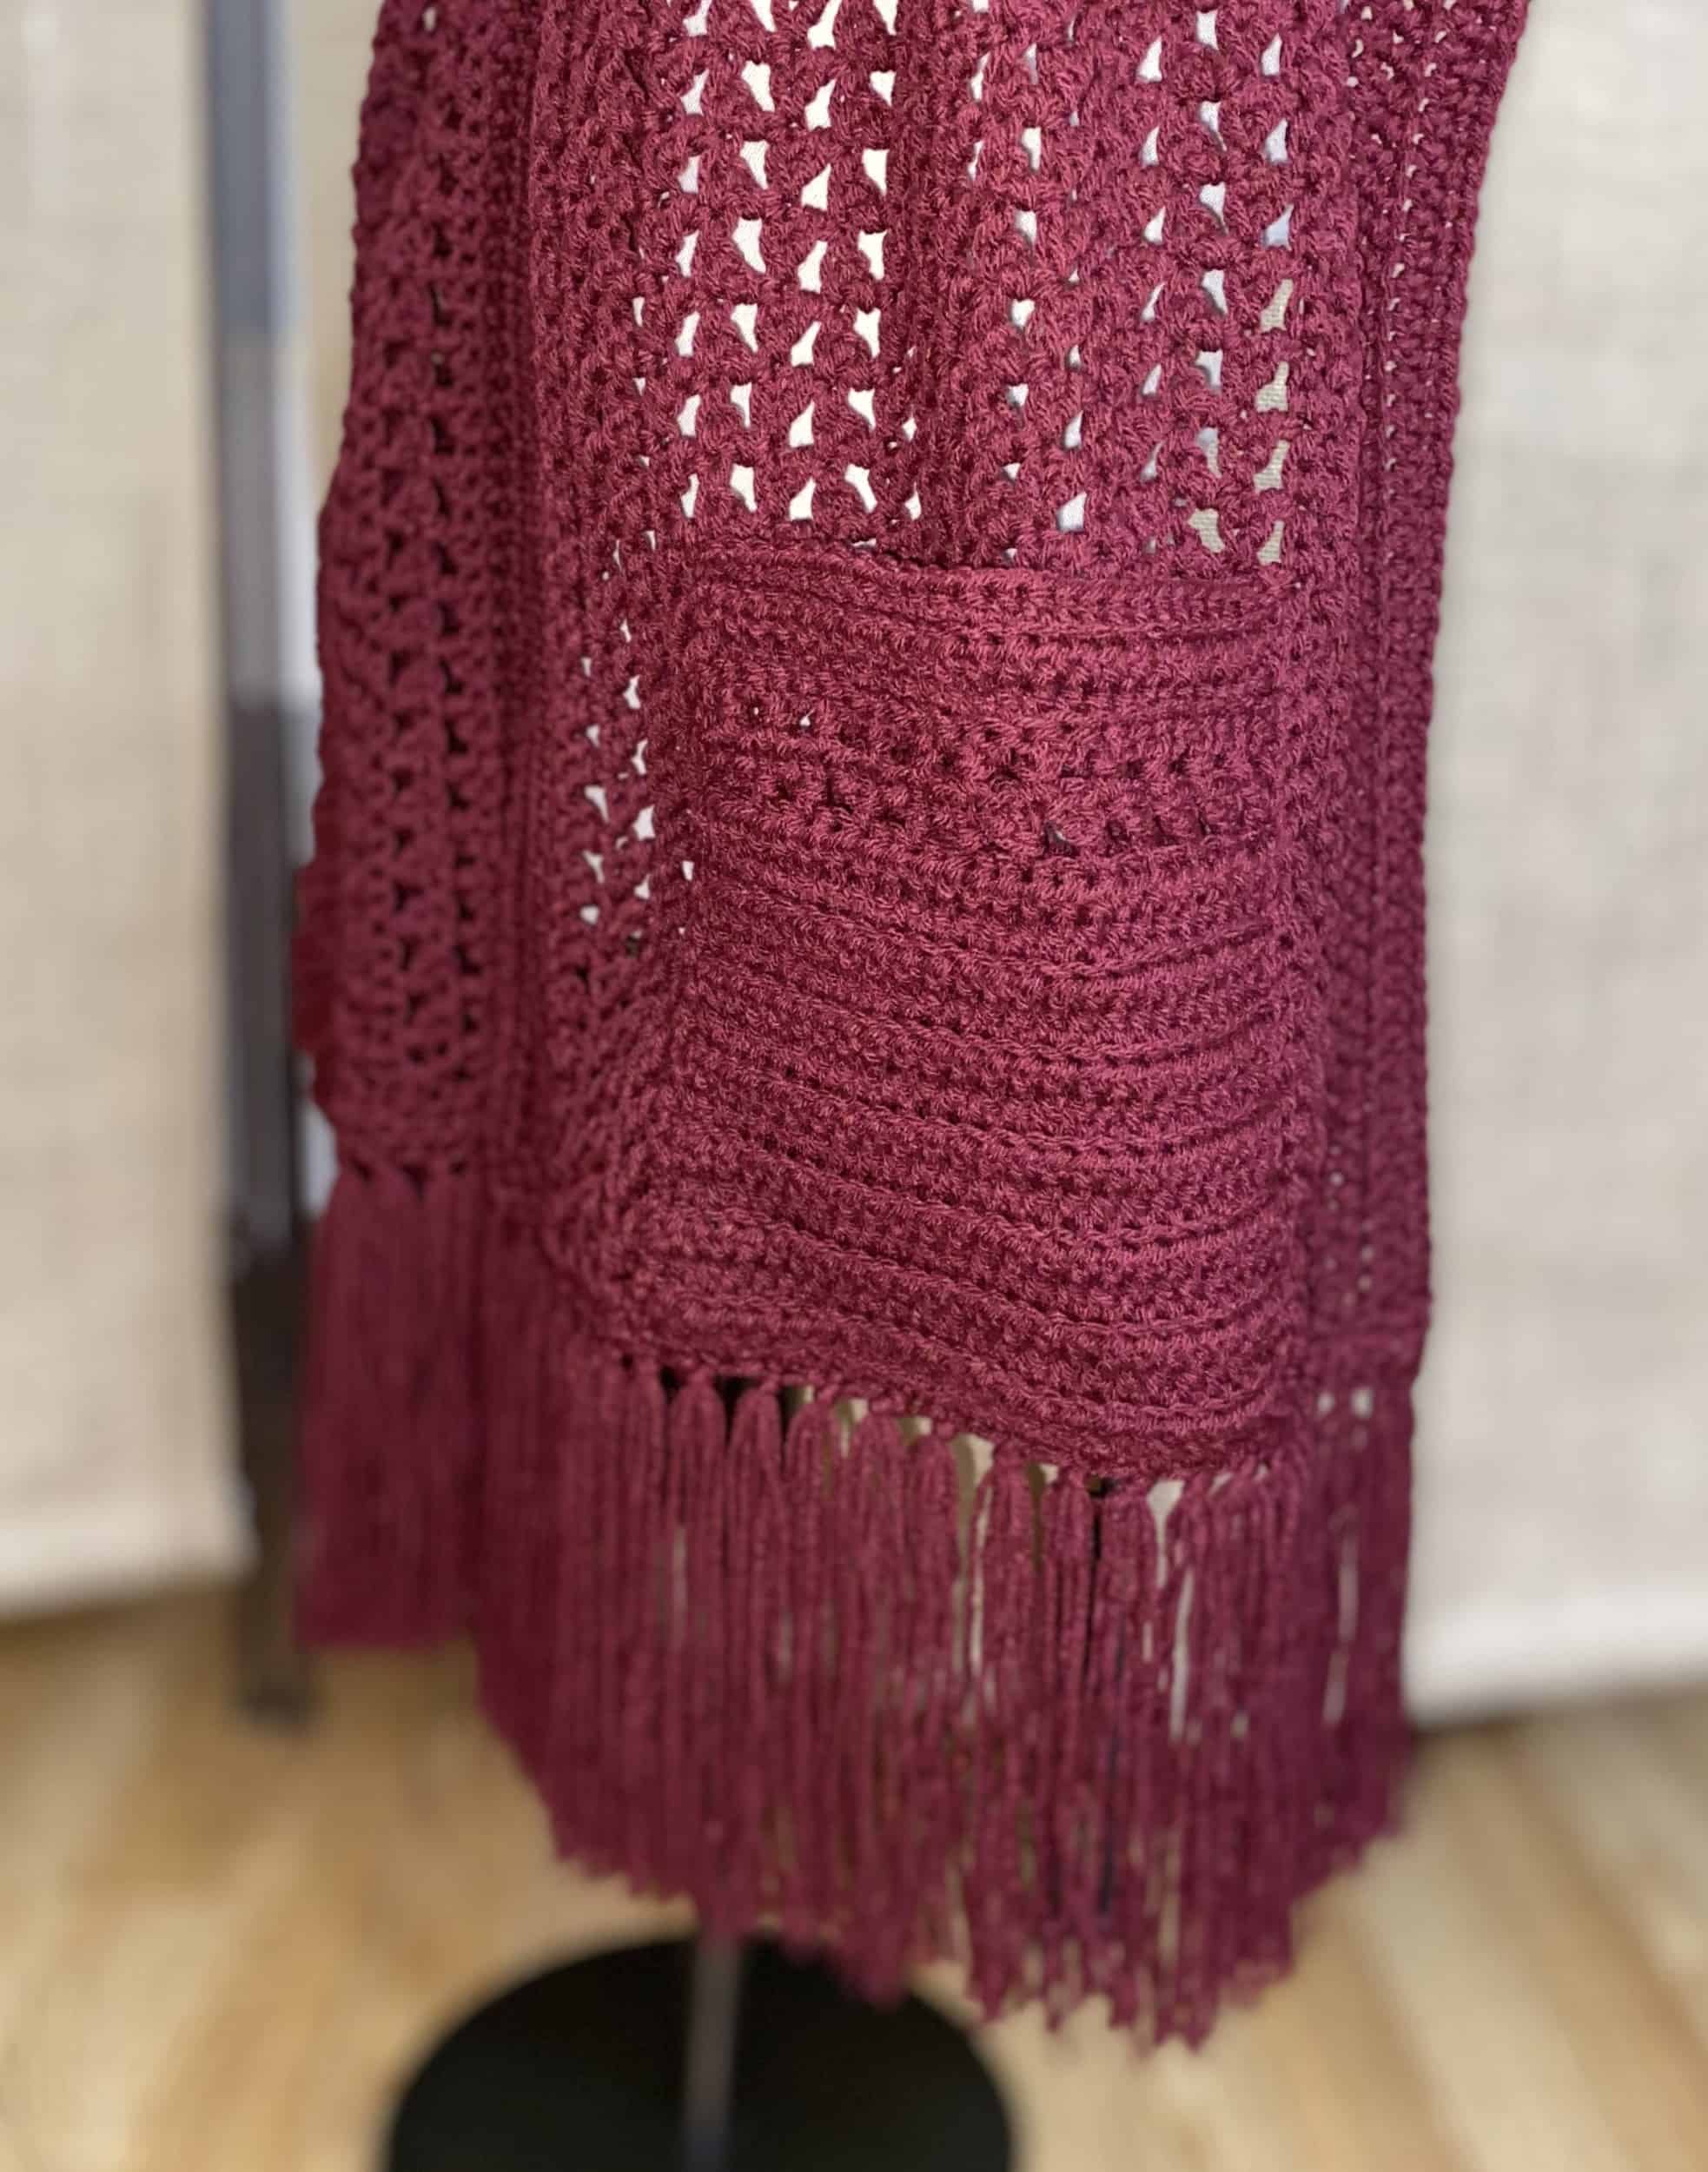 This Crochet Pocket Shawl is made with love by Classy Crafty Wife! Shop more unique gift ideas today with Spots Initiatives, the best way to support creators.